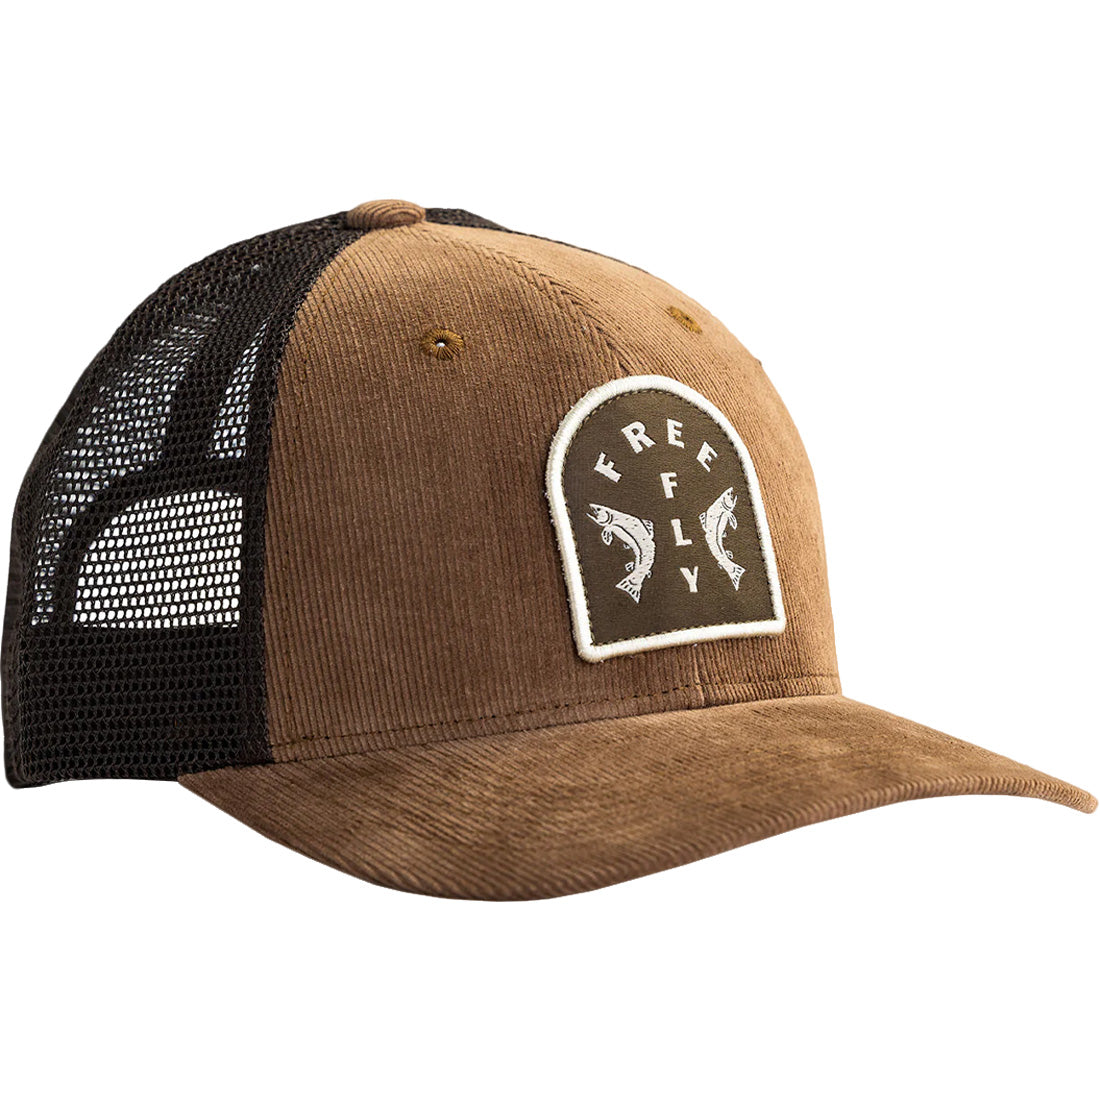 Free Fly Doubled-Up Trucker Hat